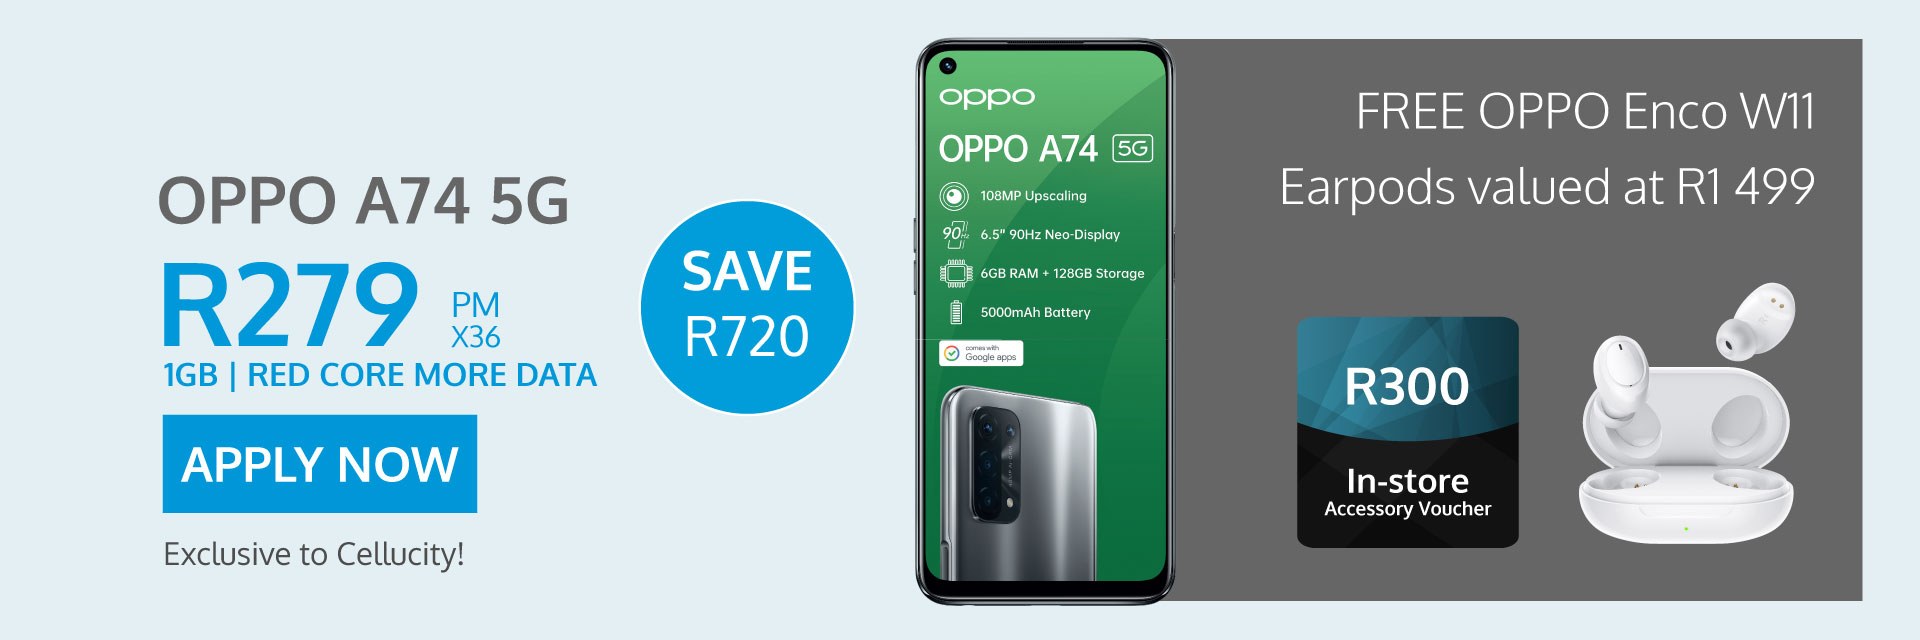 Oppo A74 5G Contract Deal